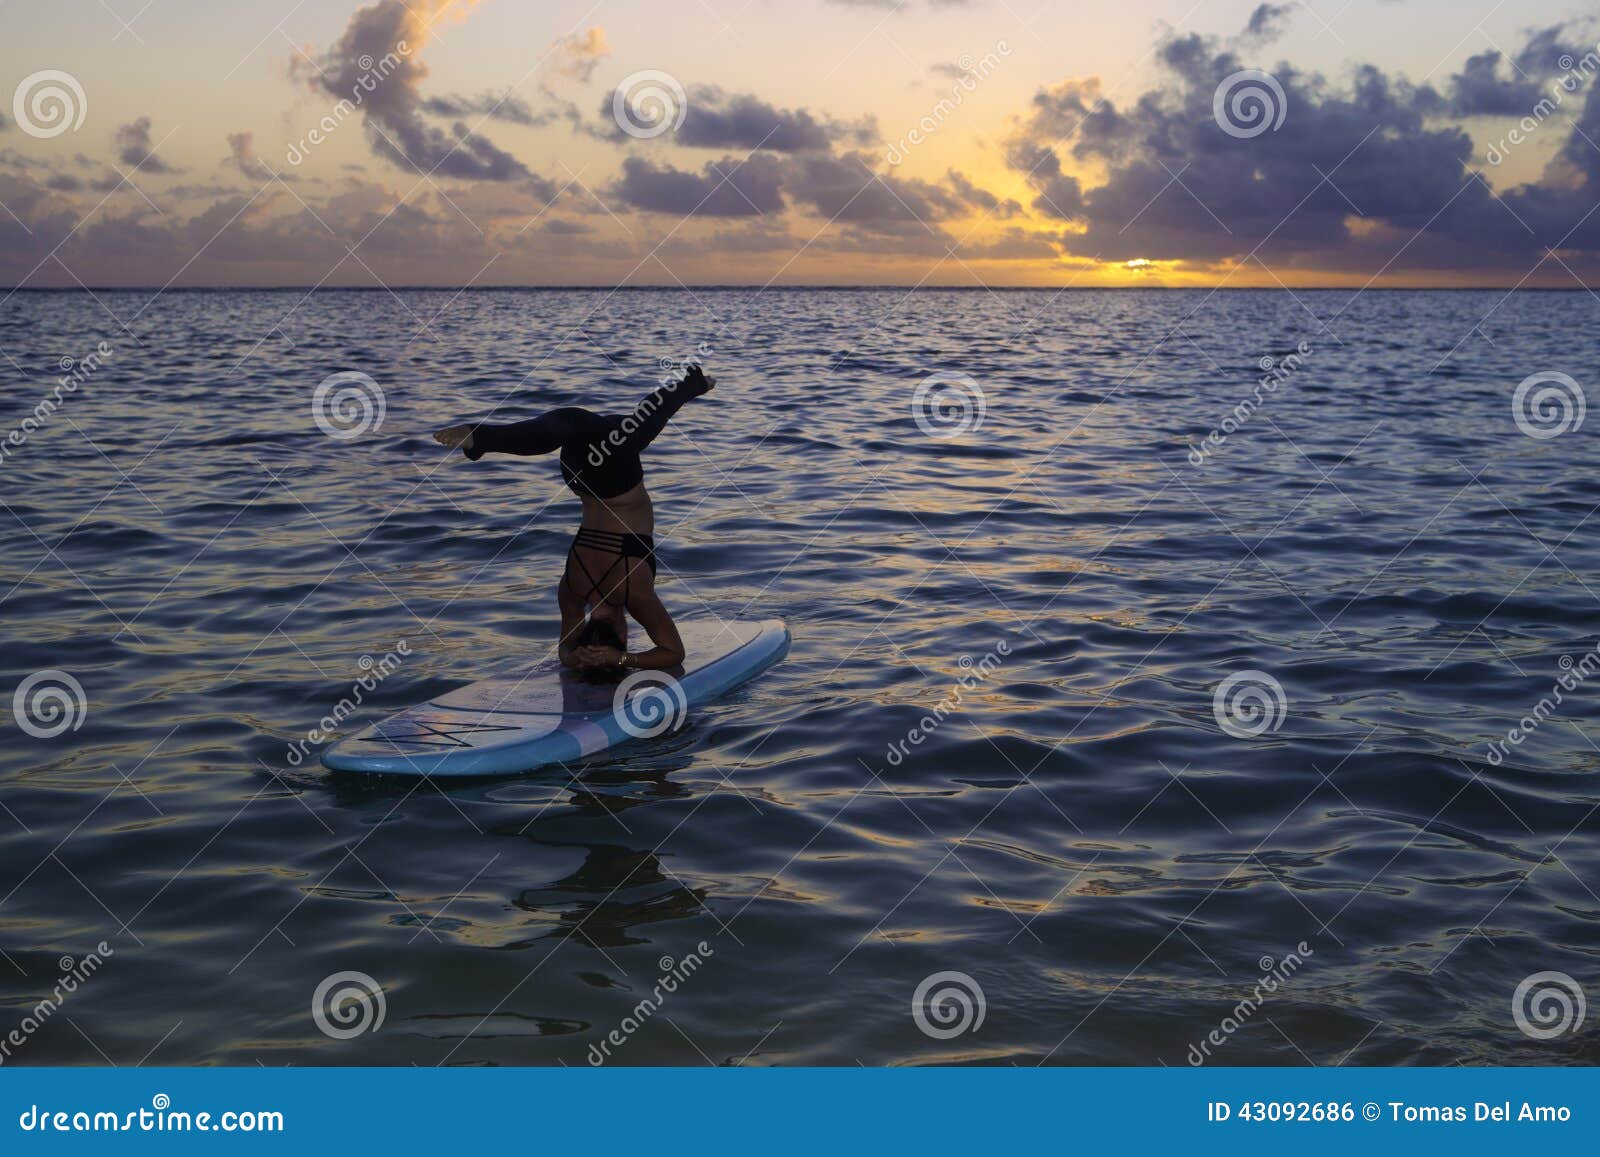 Woman Doing Yoga on a Paddle Board Stock Photo - Image of yoga, healthy ...